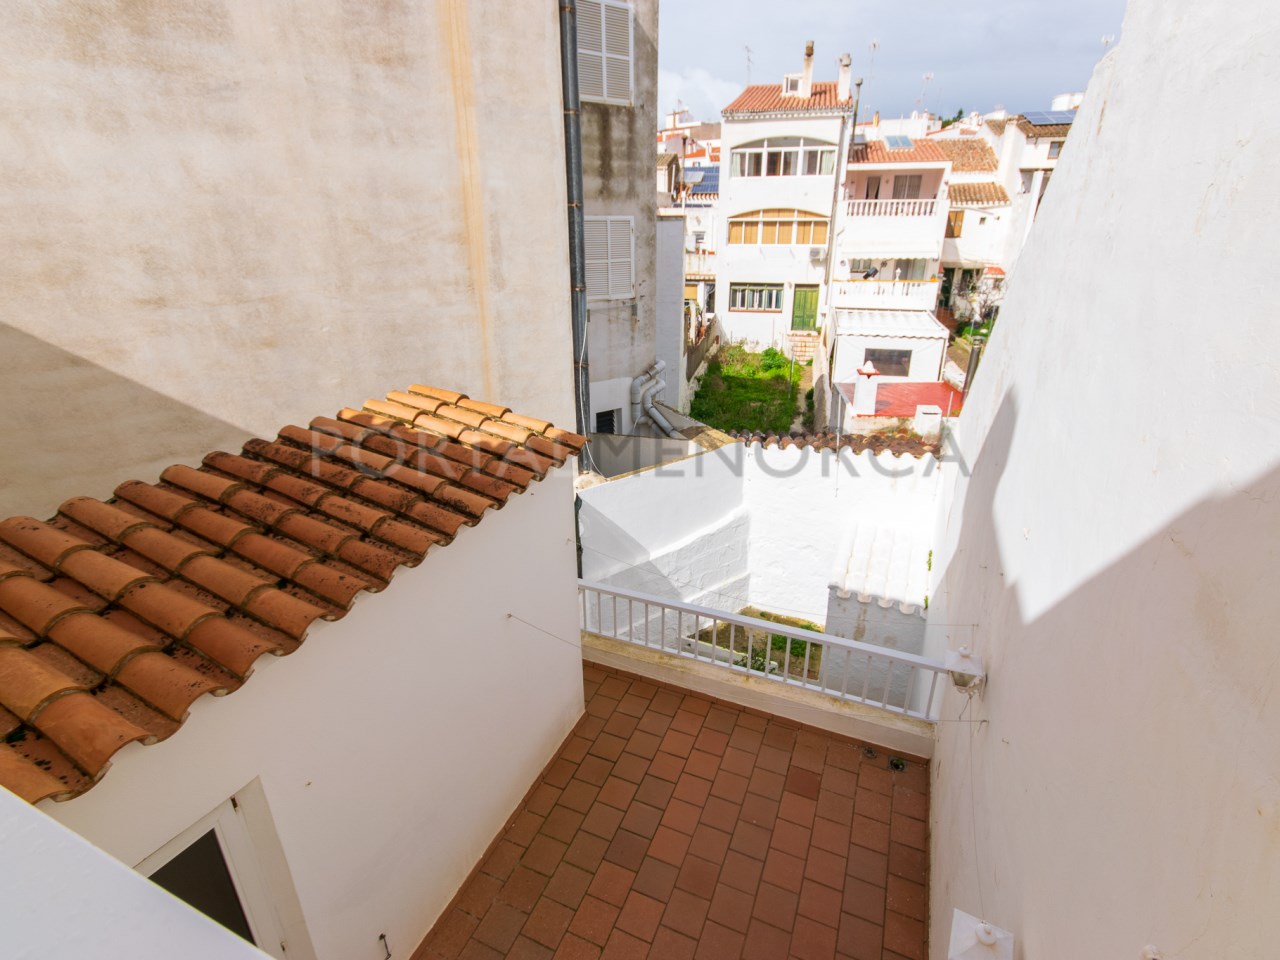 Terrace views whole house room with orchard for sale in Alaior